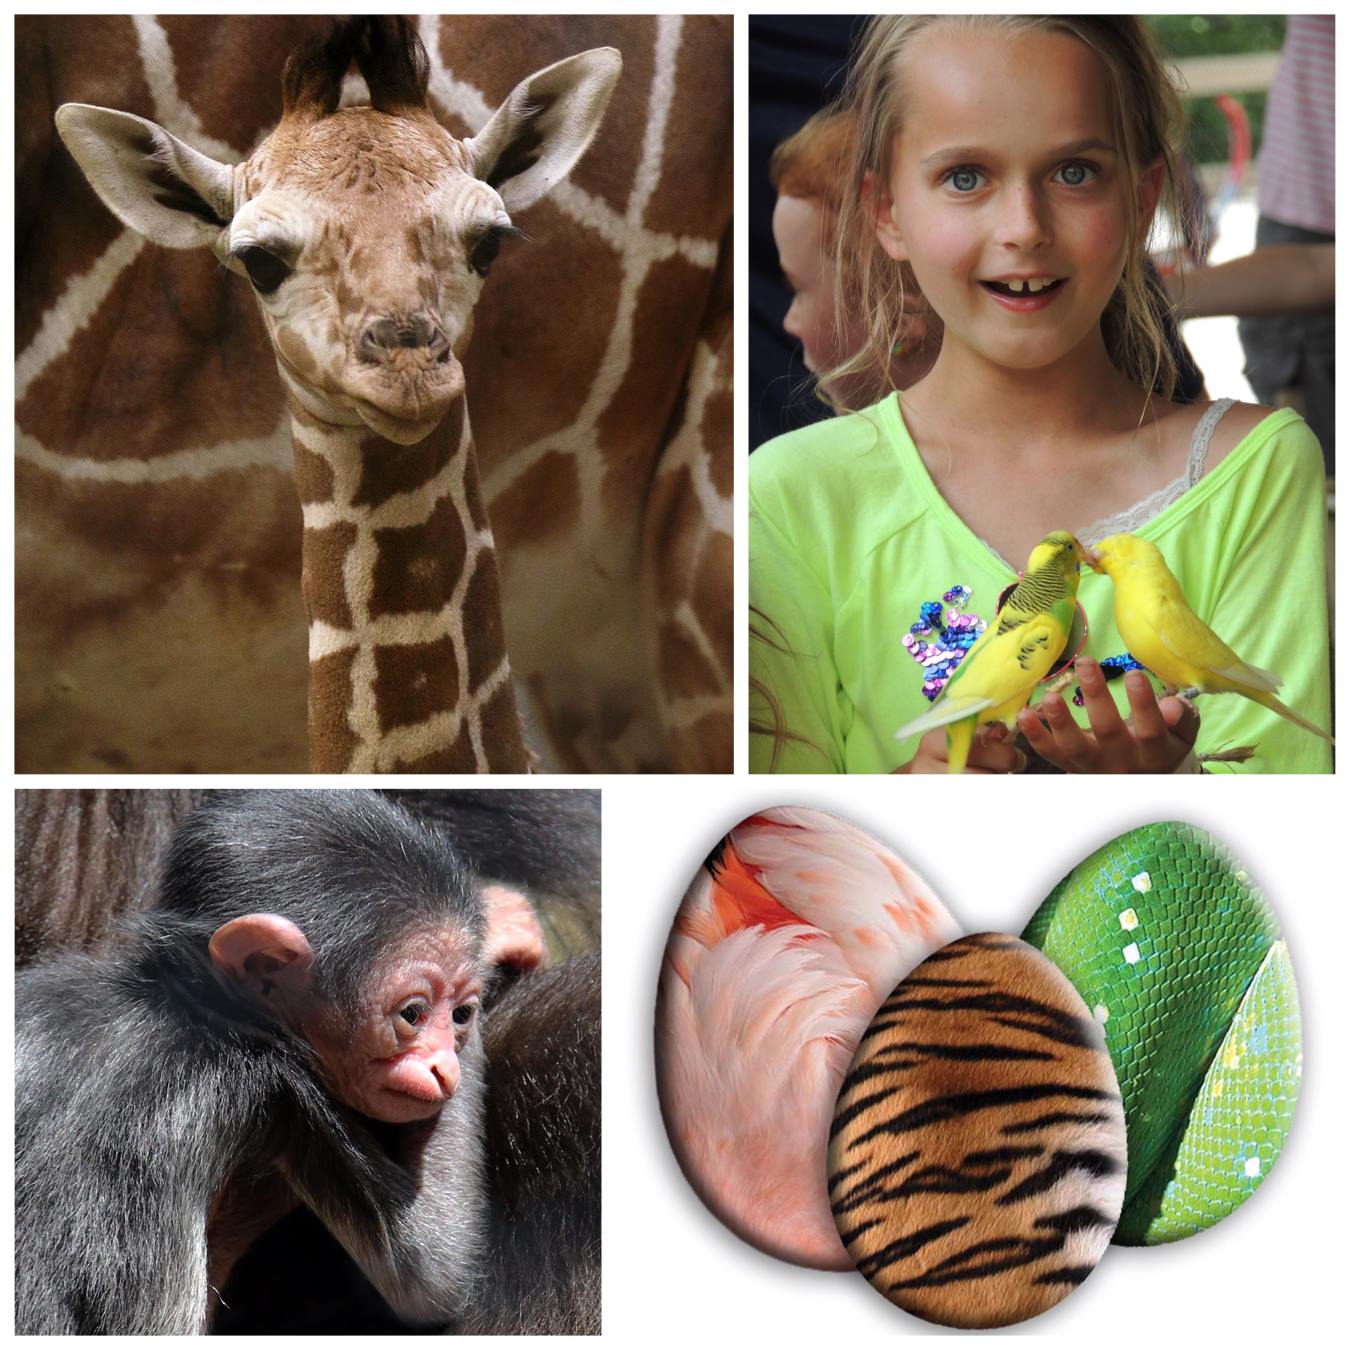 Celebrate Easter and New Beginnings at the Zoo